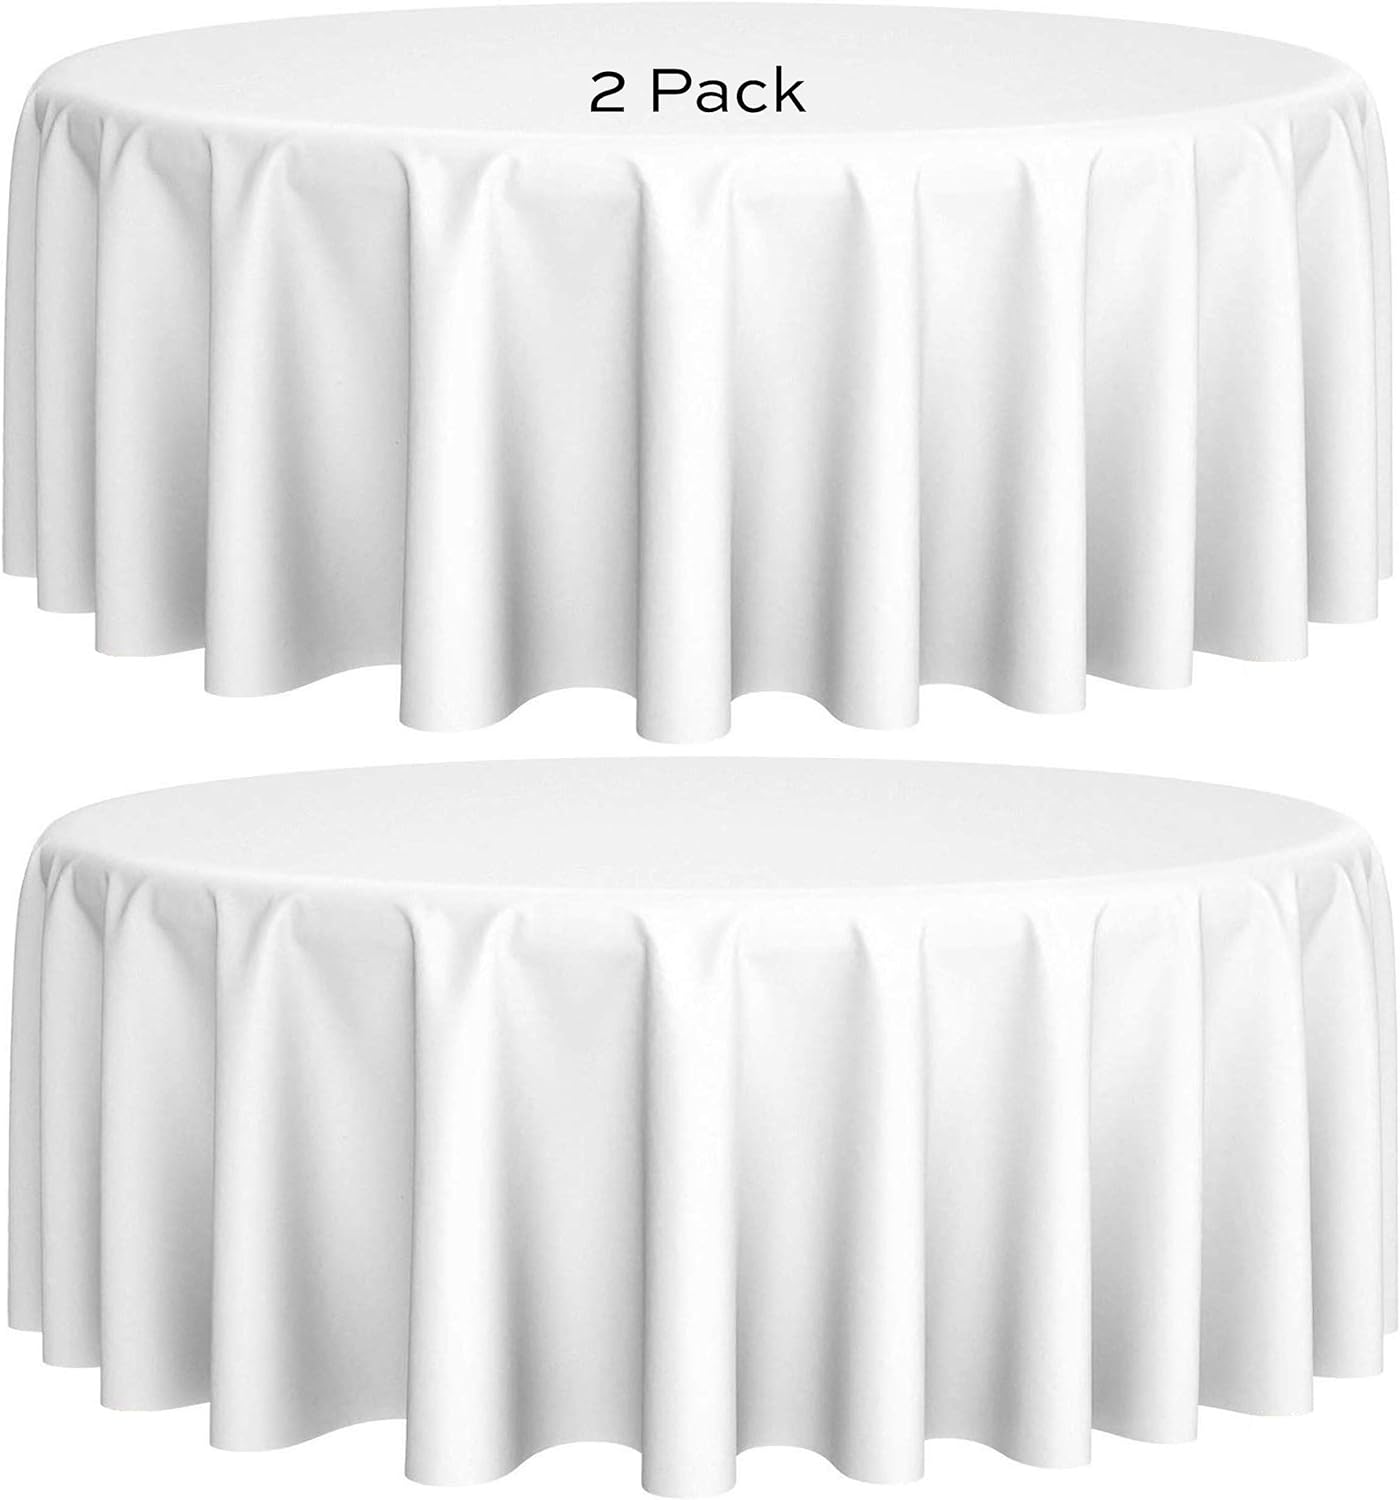 These table cloths are great ! They are restaurant quality ! I was so pleased when I got these, that we bought more in a different size for the rectangle tables. They cleaned up beautifully after the party as well. I used them on a 40 inch table and they fell right to the floor, which is what I wanted ! Will definitely recommend these to others.